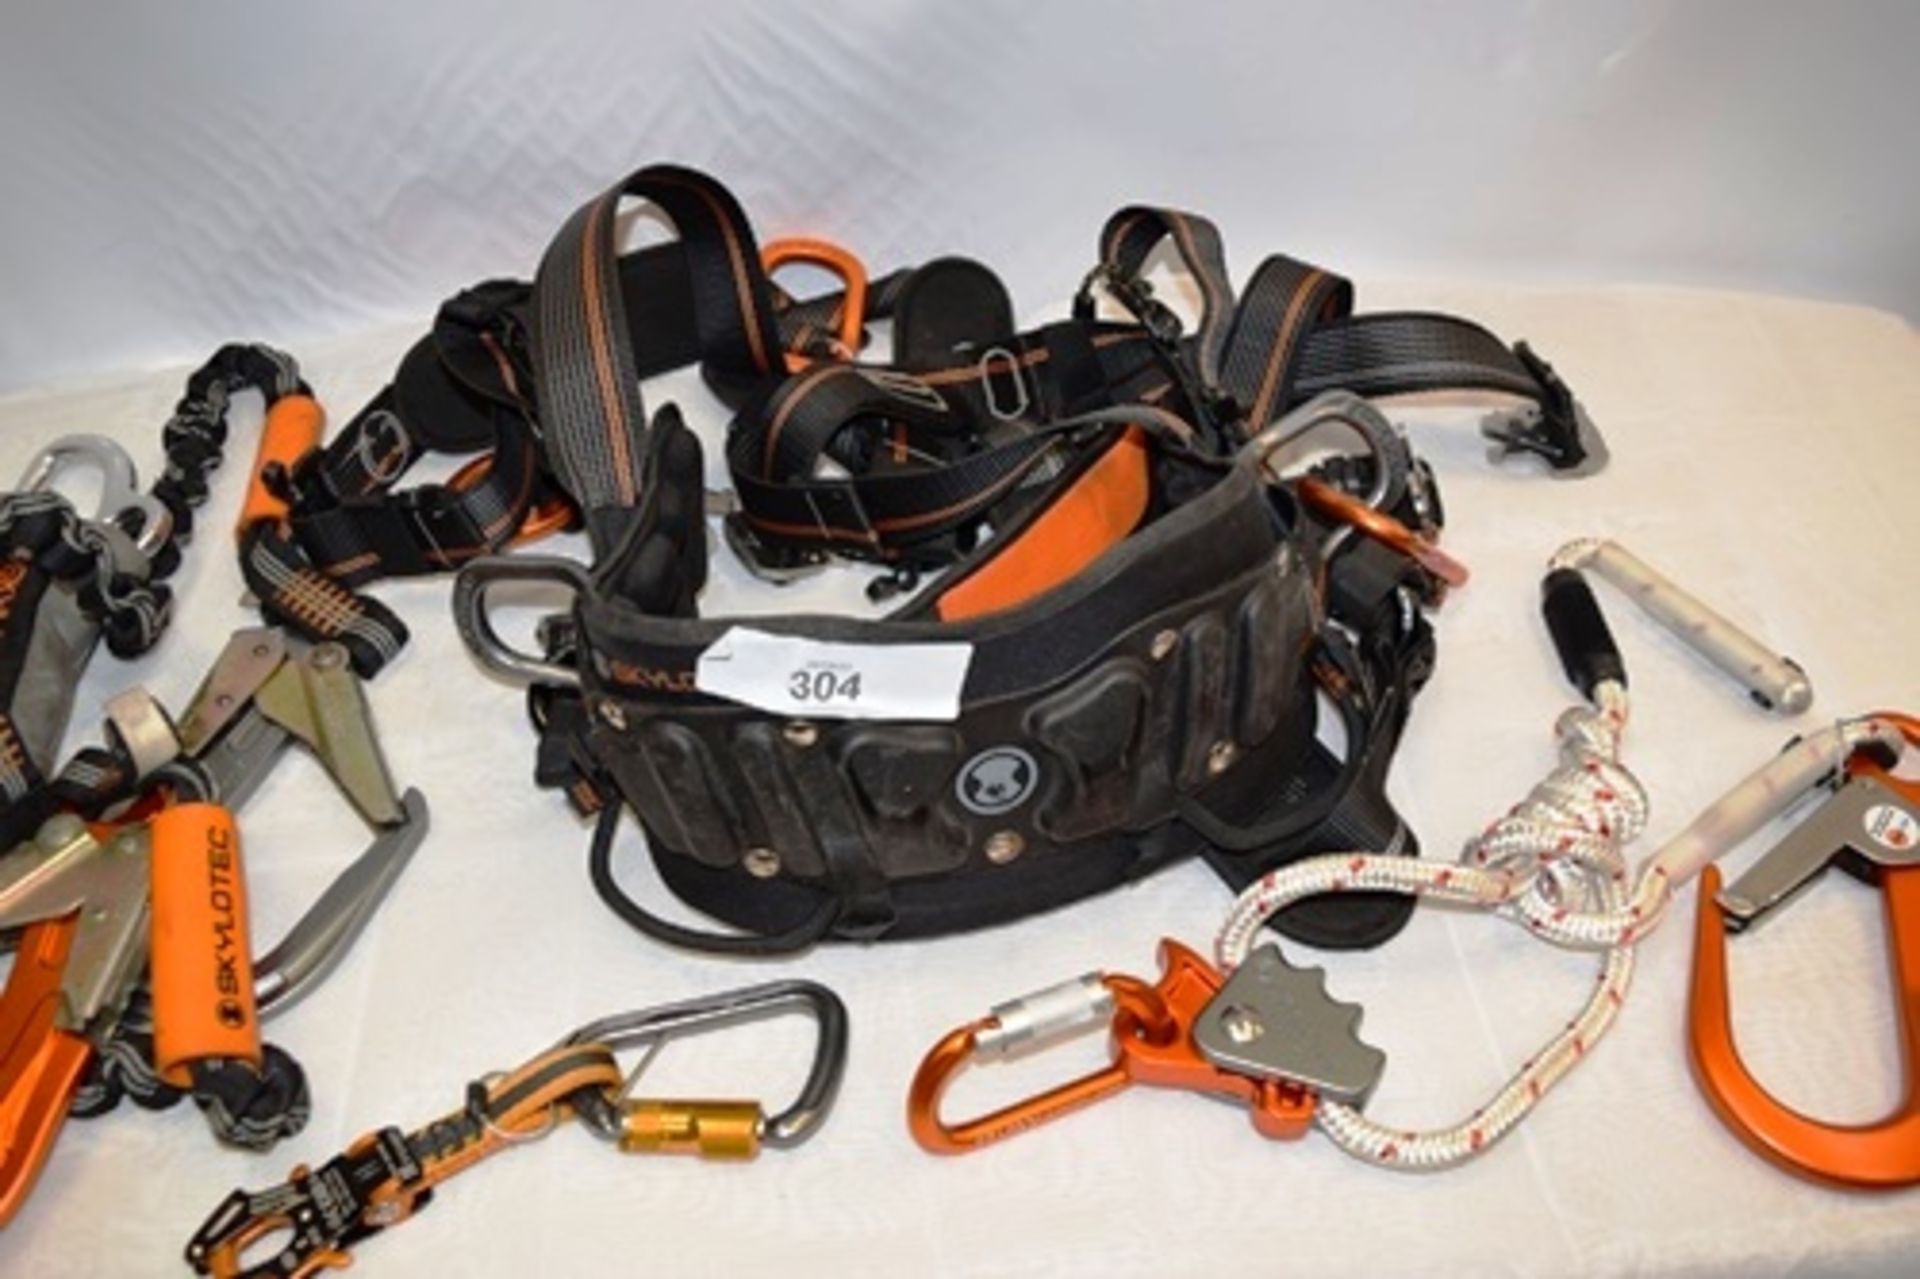 1 x Skylotec full body harness model: Ignite proton wind size M/XXL 91/124cm.- together with 1 x - Image 2 of 3